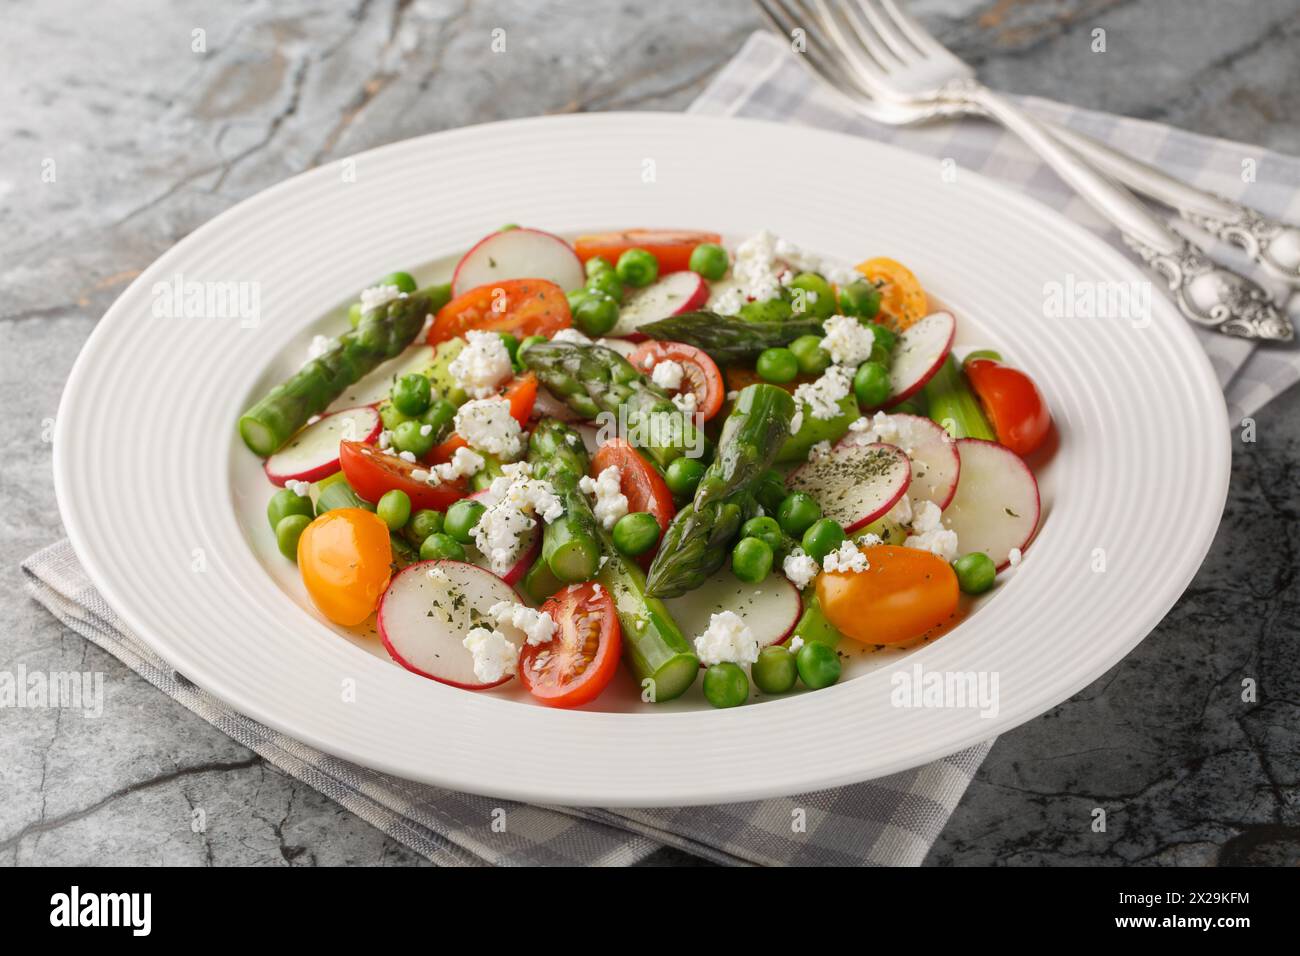 Salad of asparagus, radishes, cherry tomatoes, green peas and goat cheese dressed with vinaigrette close-up in a plate on the table. Horizontal Stock Photo